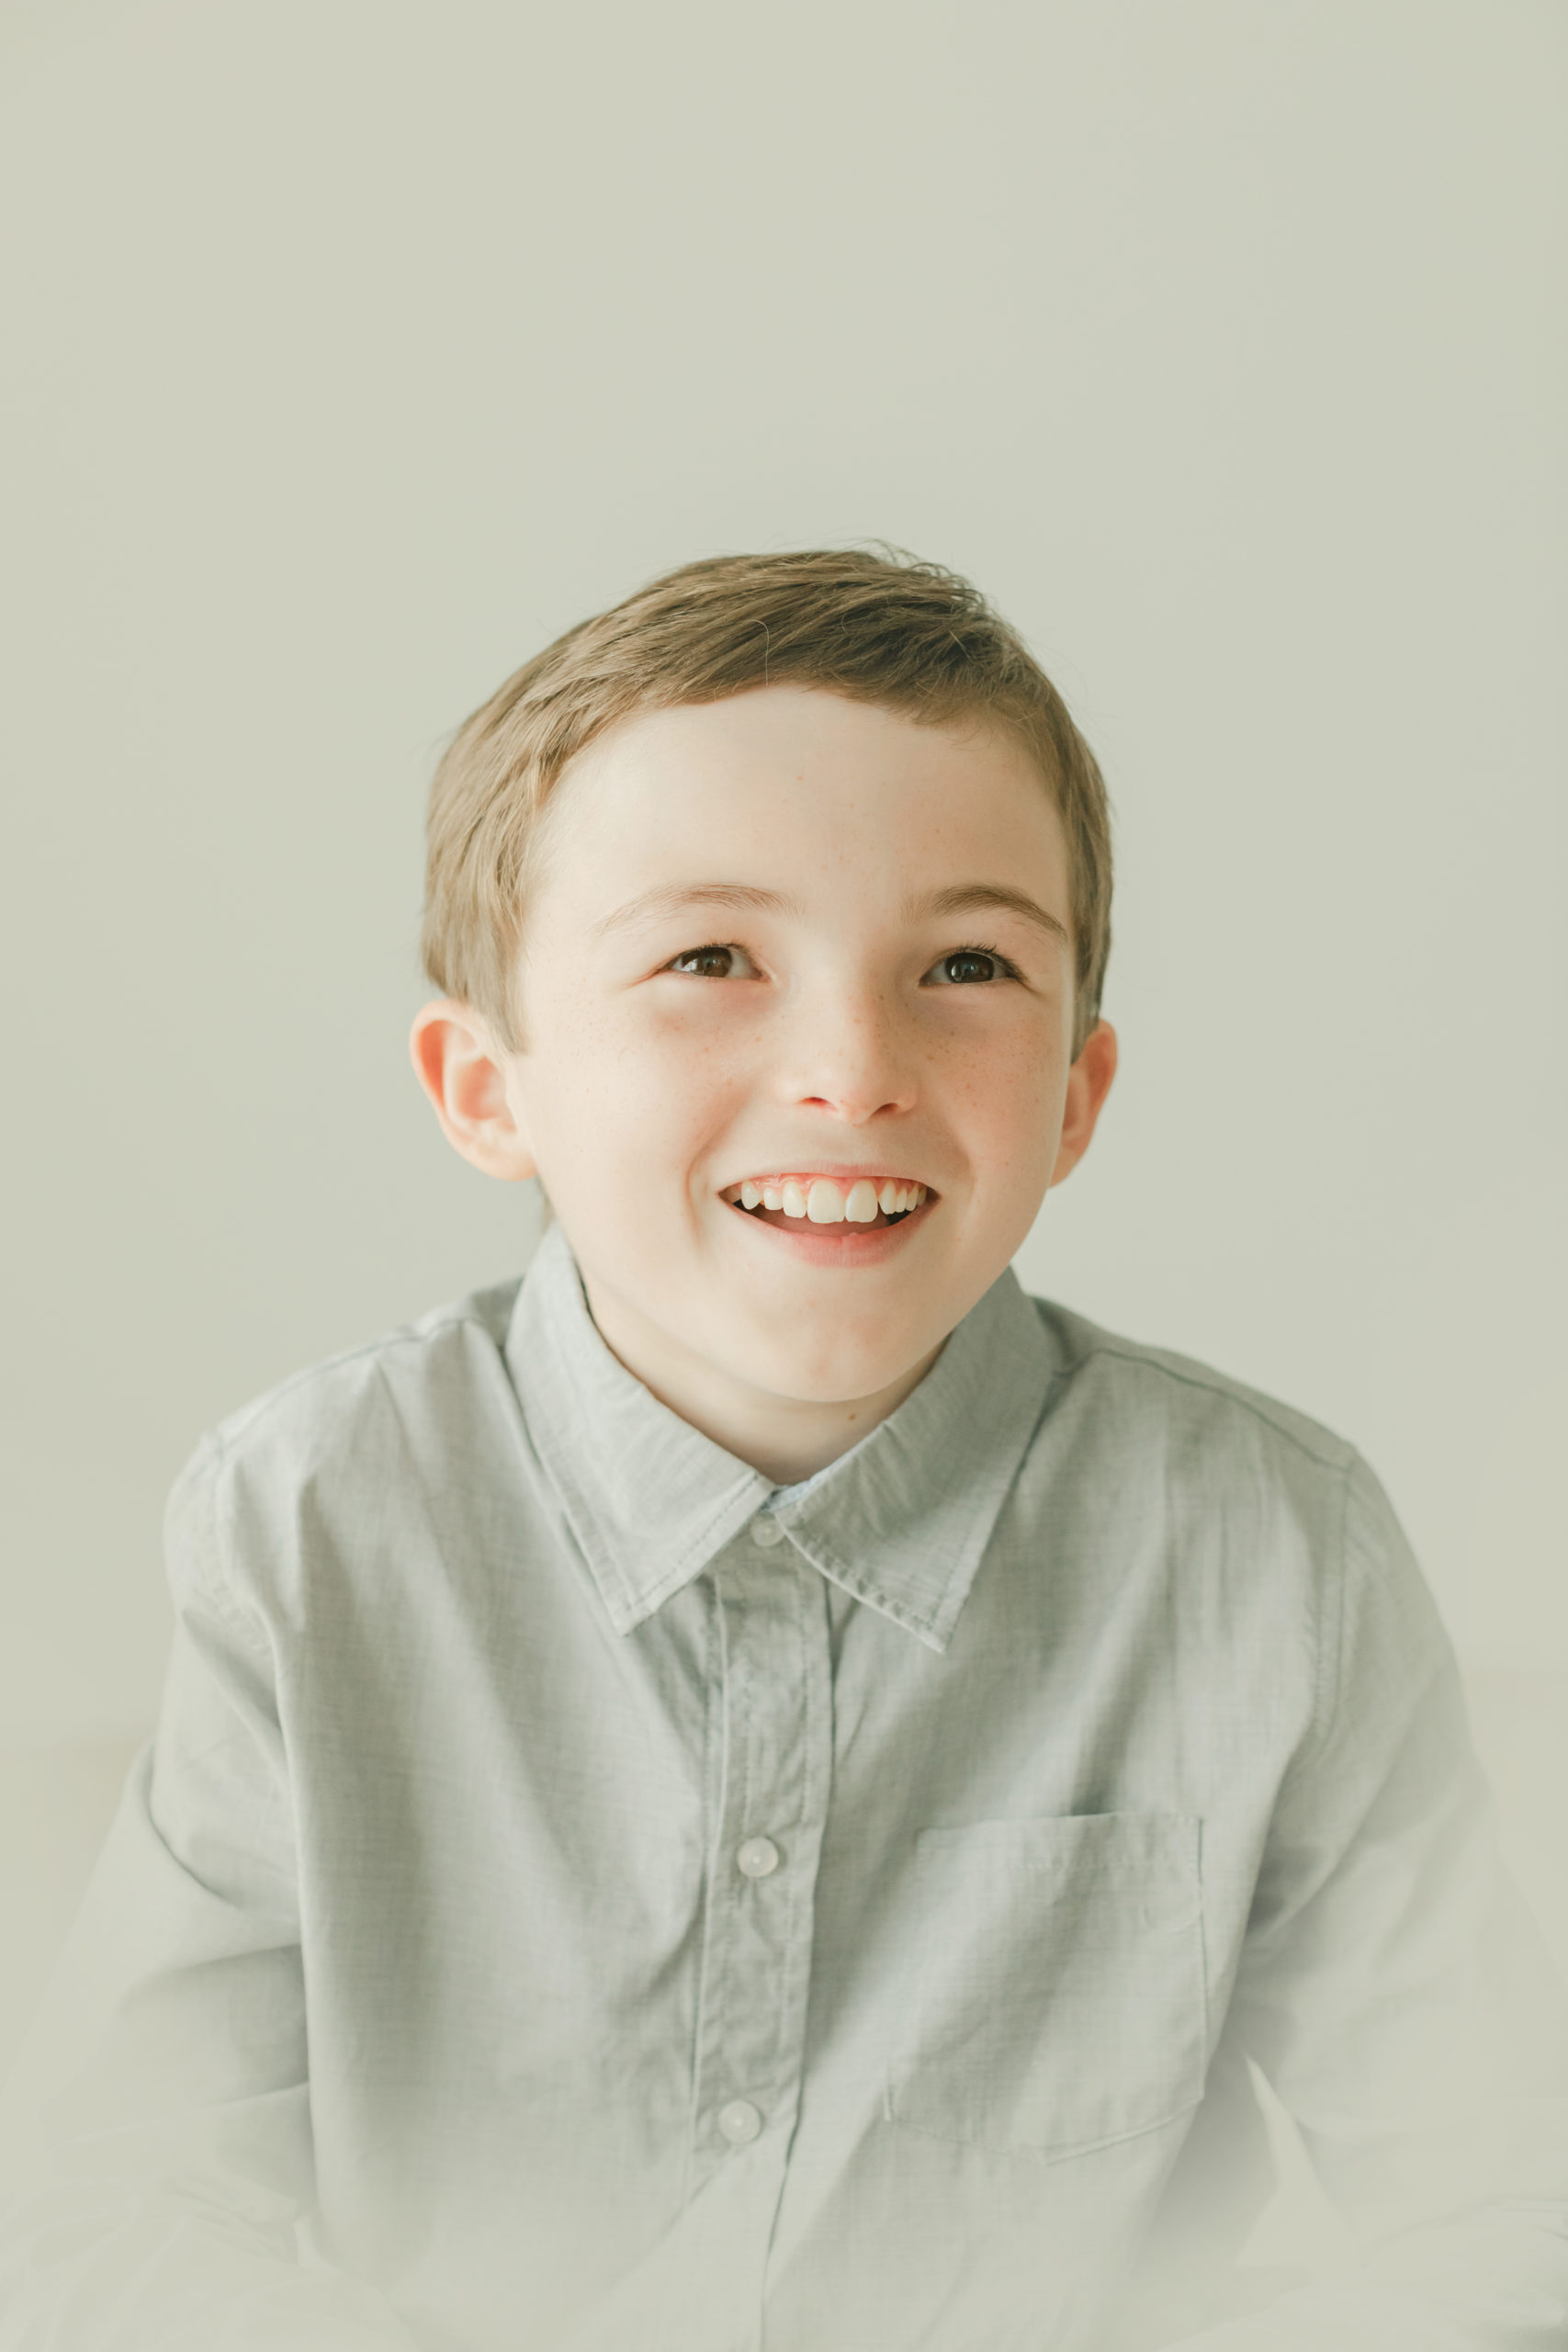 vintage inspired portrait of young boy